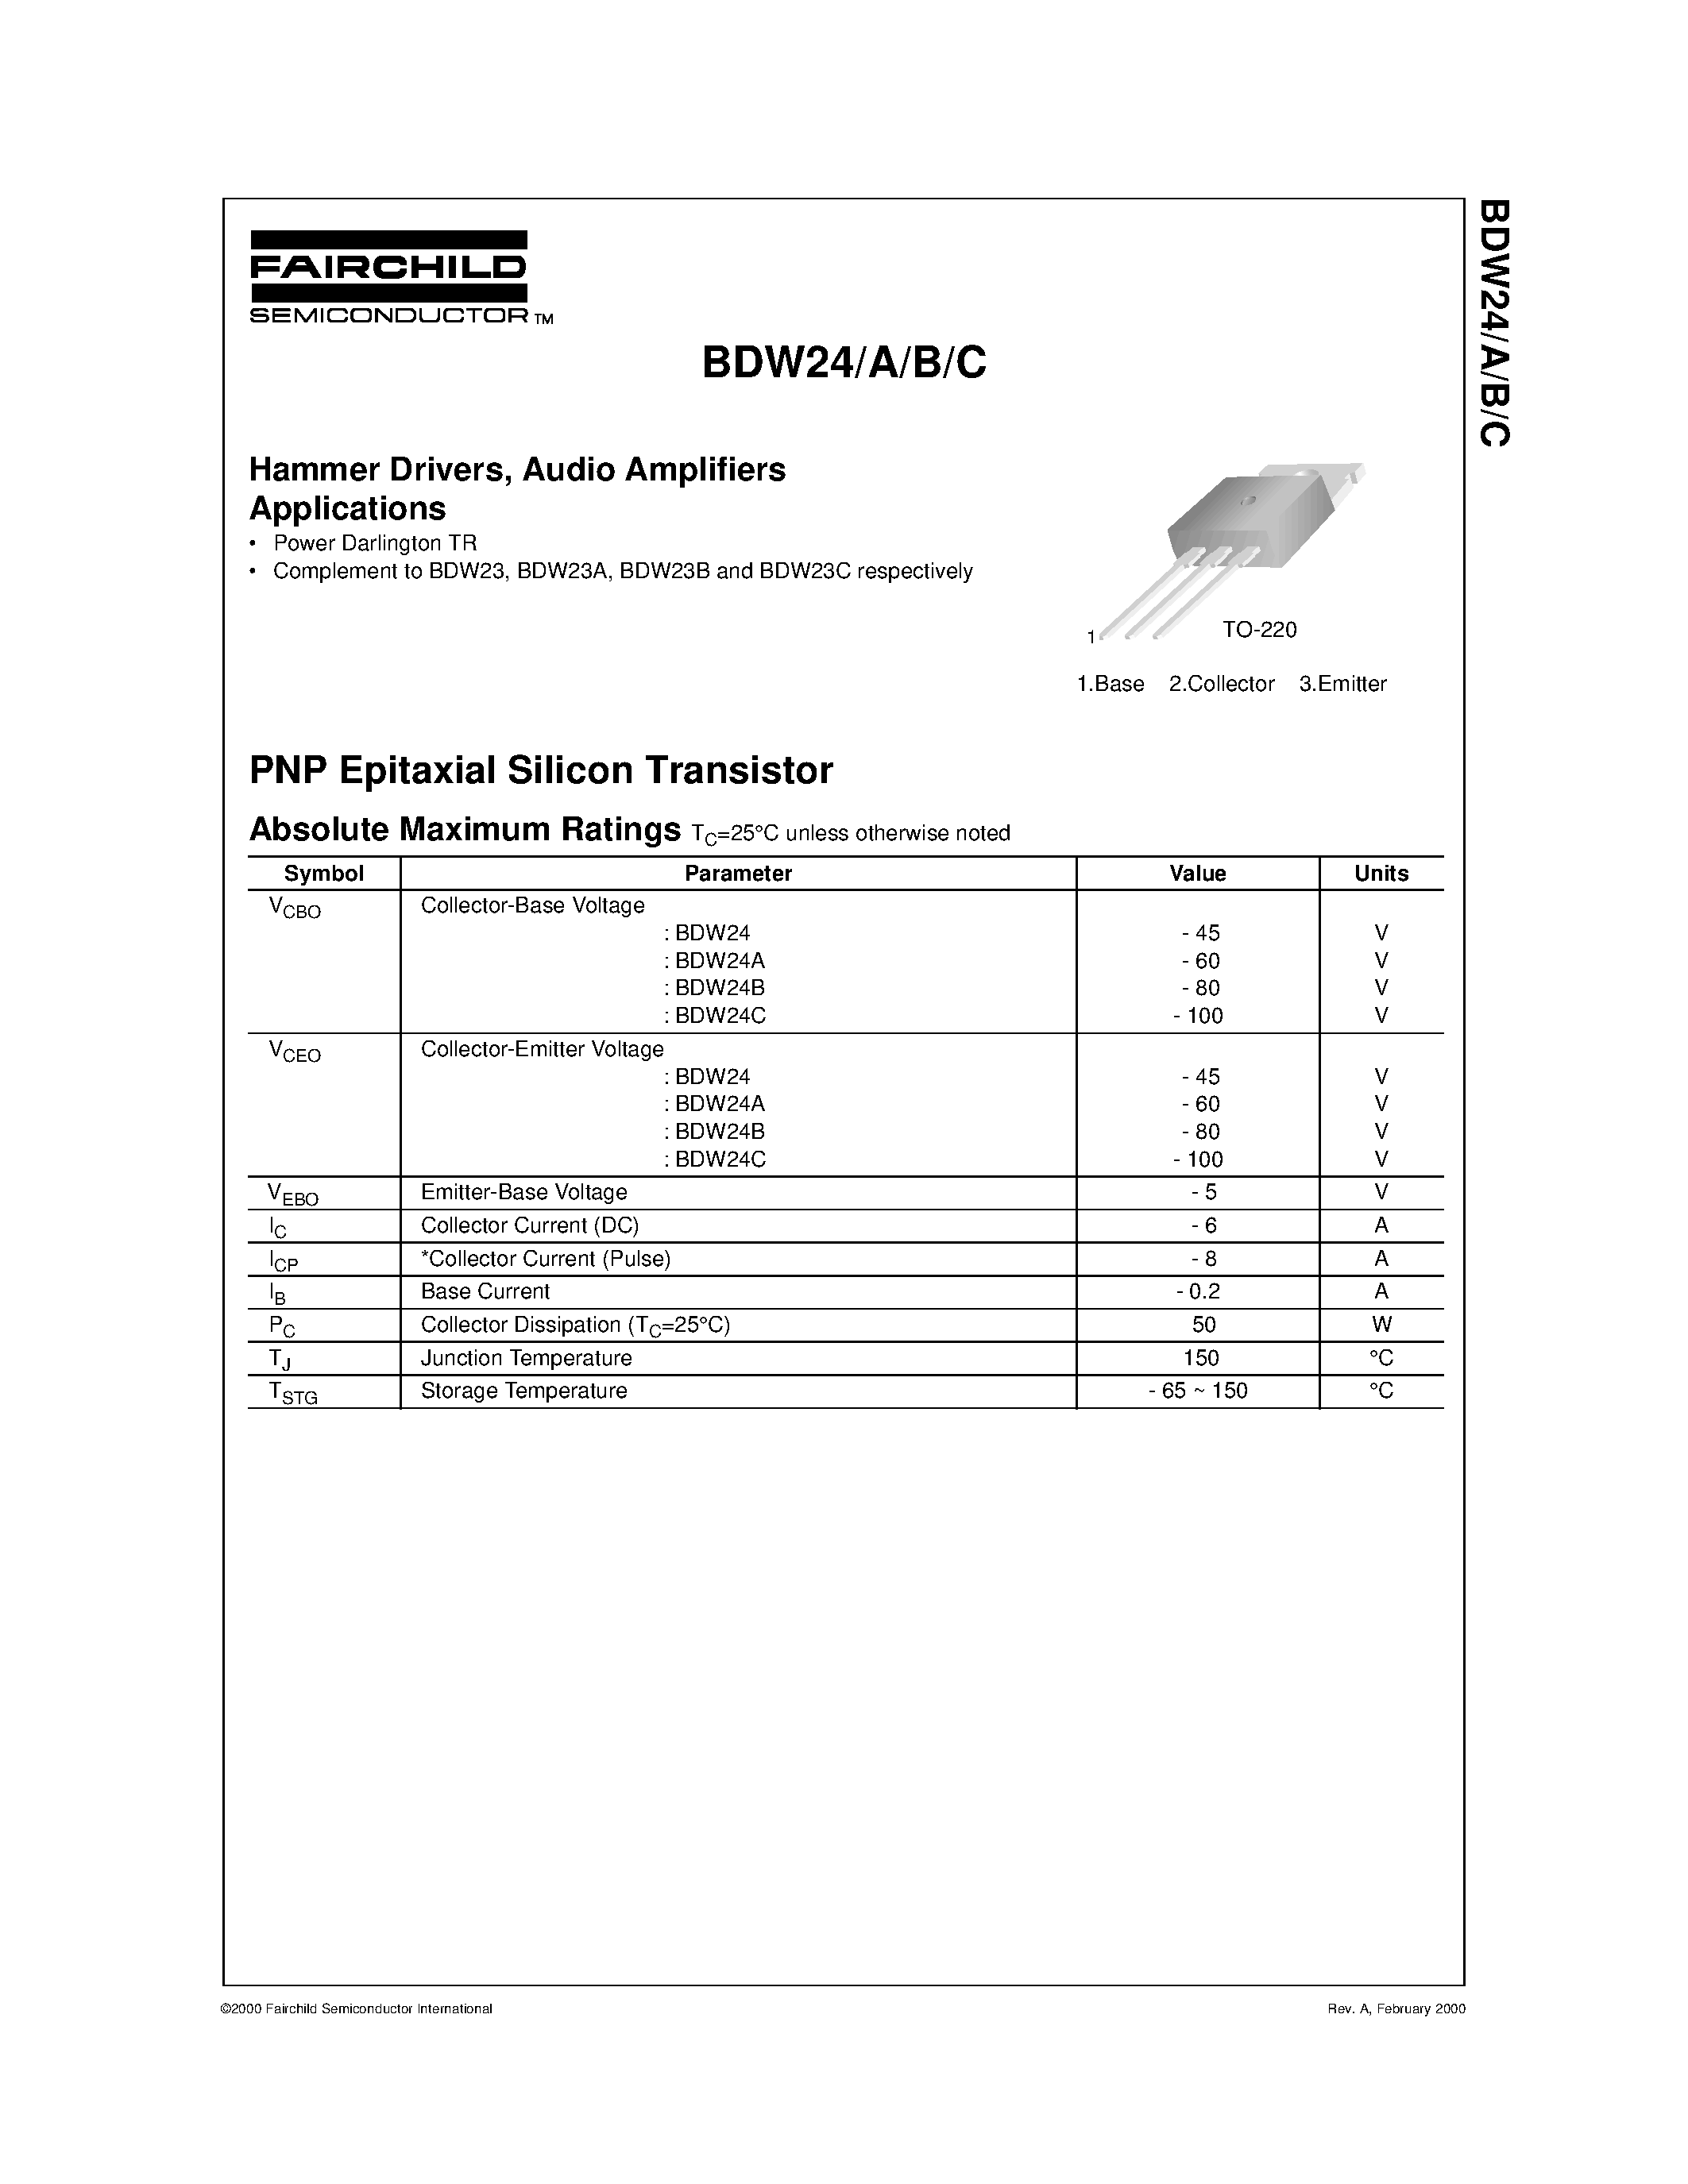 Datasheet BDW24B - Hammer Drivers/ Audio Amplifiers Applications page 1